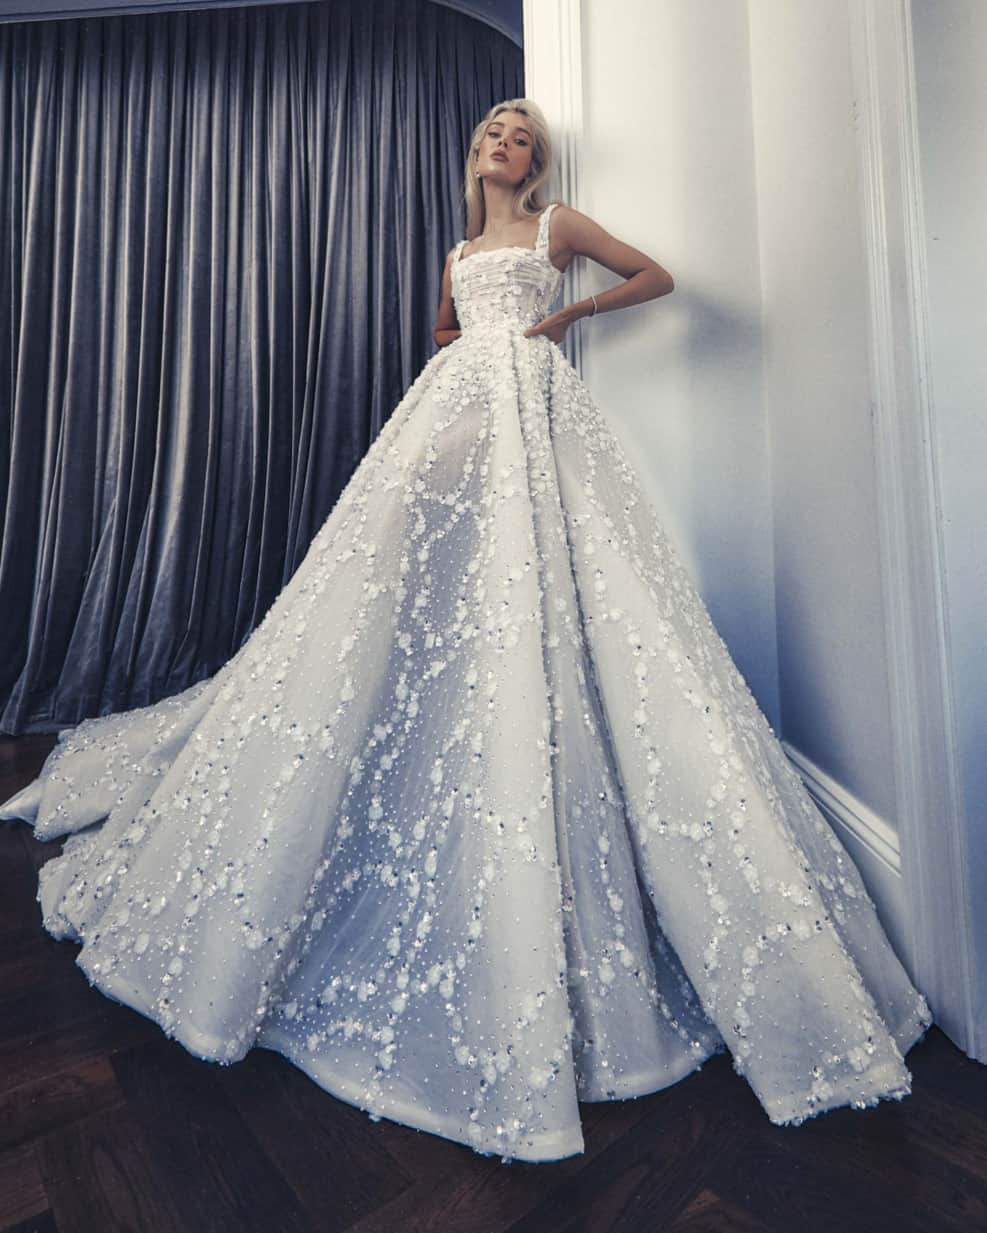 Steven Khalilのインスタグラム：「Introducing the Jaz gown, a true work of art that embodies ethereal beauty and intricate craftsmanship. This enchanting gown features a pale latte tulle base that sets a whimsical and romantic tone.⁣Discover more by booking an appointment in our Sydney atelier. #stevenkhalil #stevenkhalilbride #weddinggown #bridal」